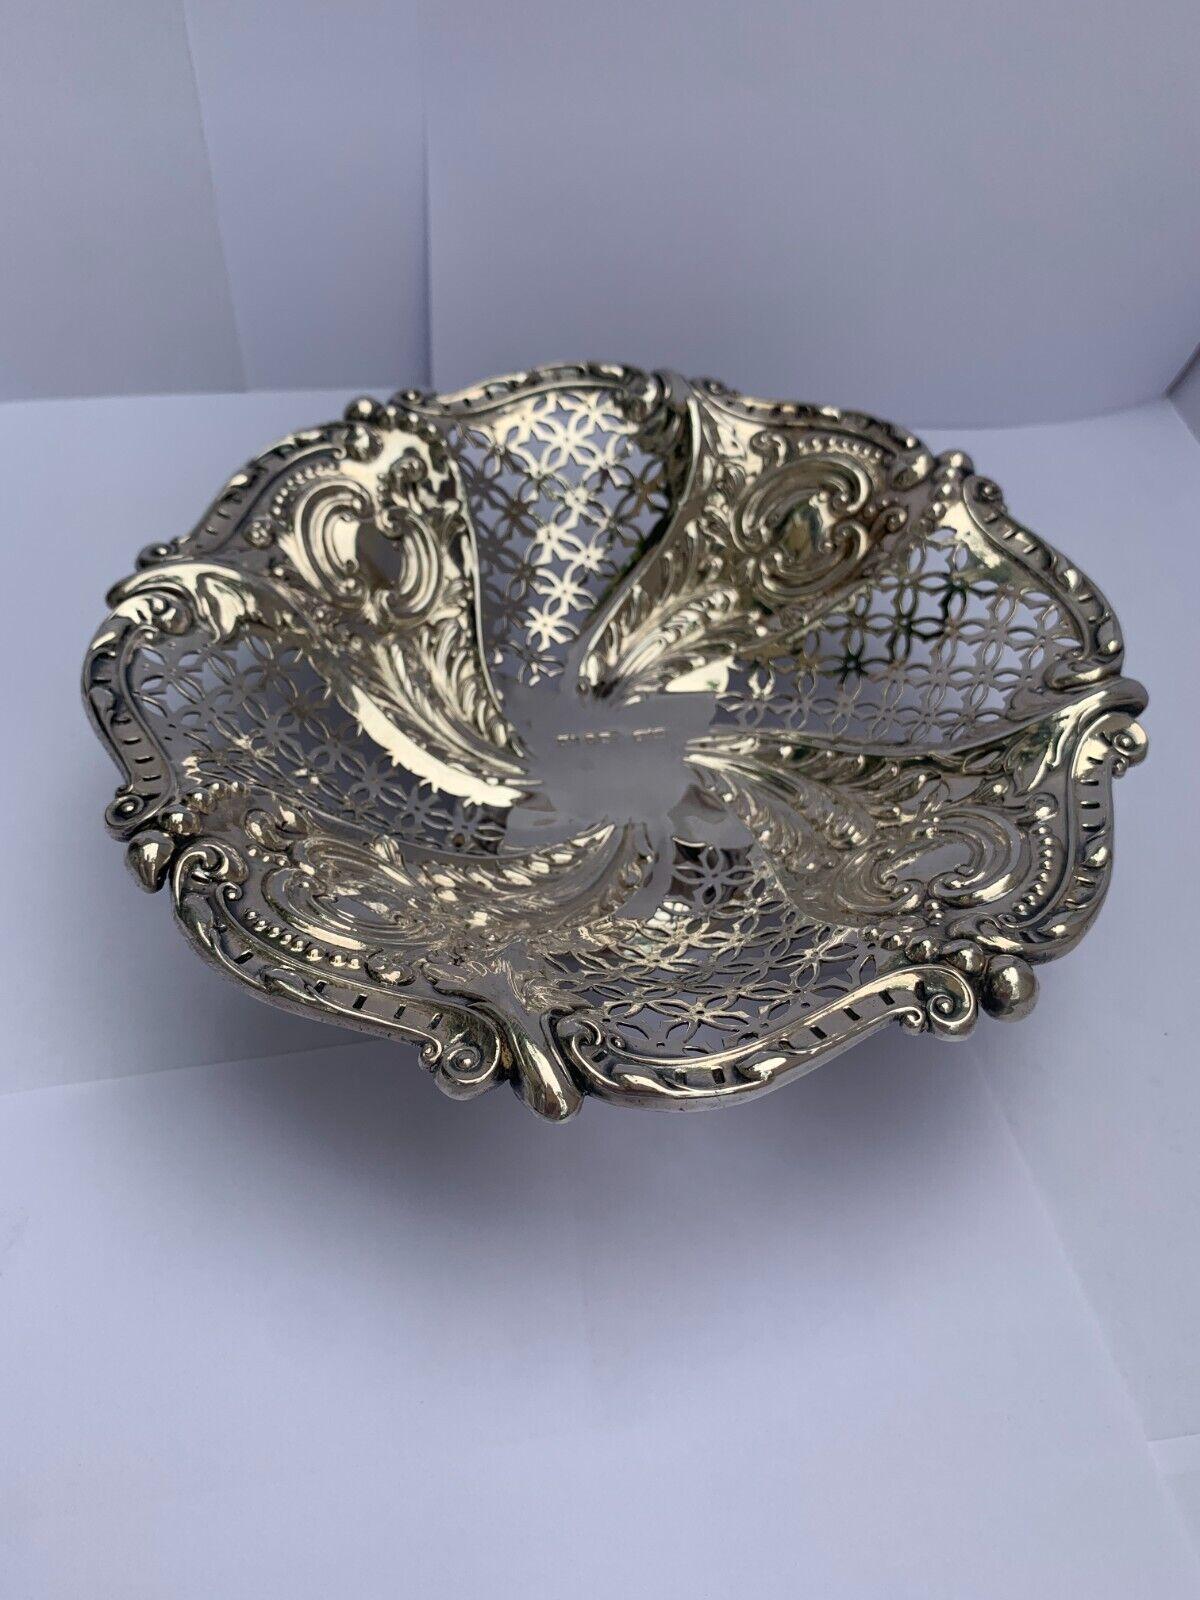 Pierced Sterling Silver Bonbon/Nut Dish by James Dixon & Sons Ltd, 1917 In Good Condition For Sale In London, GB